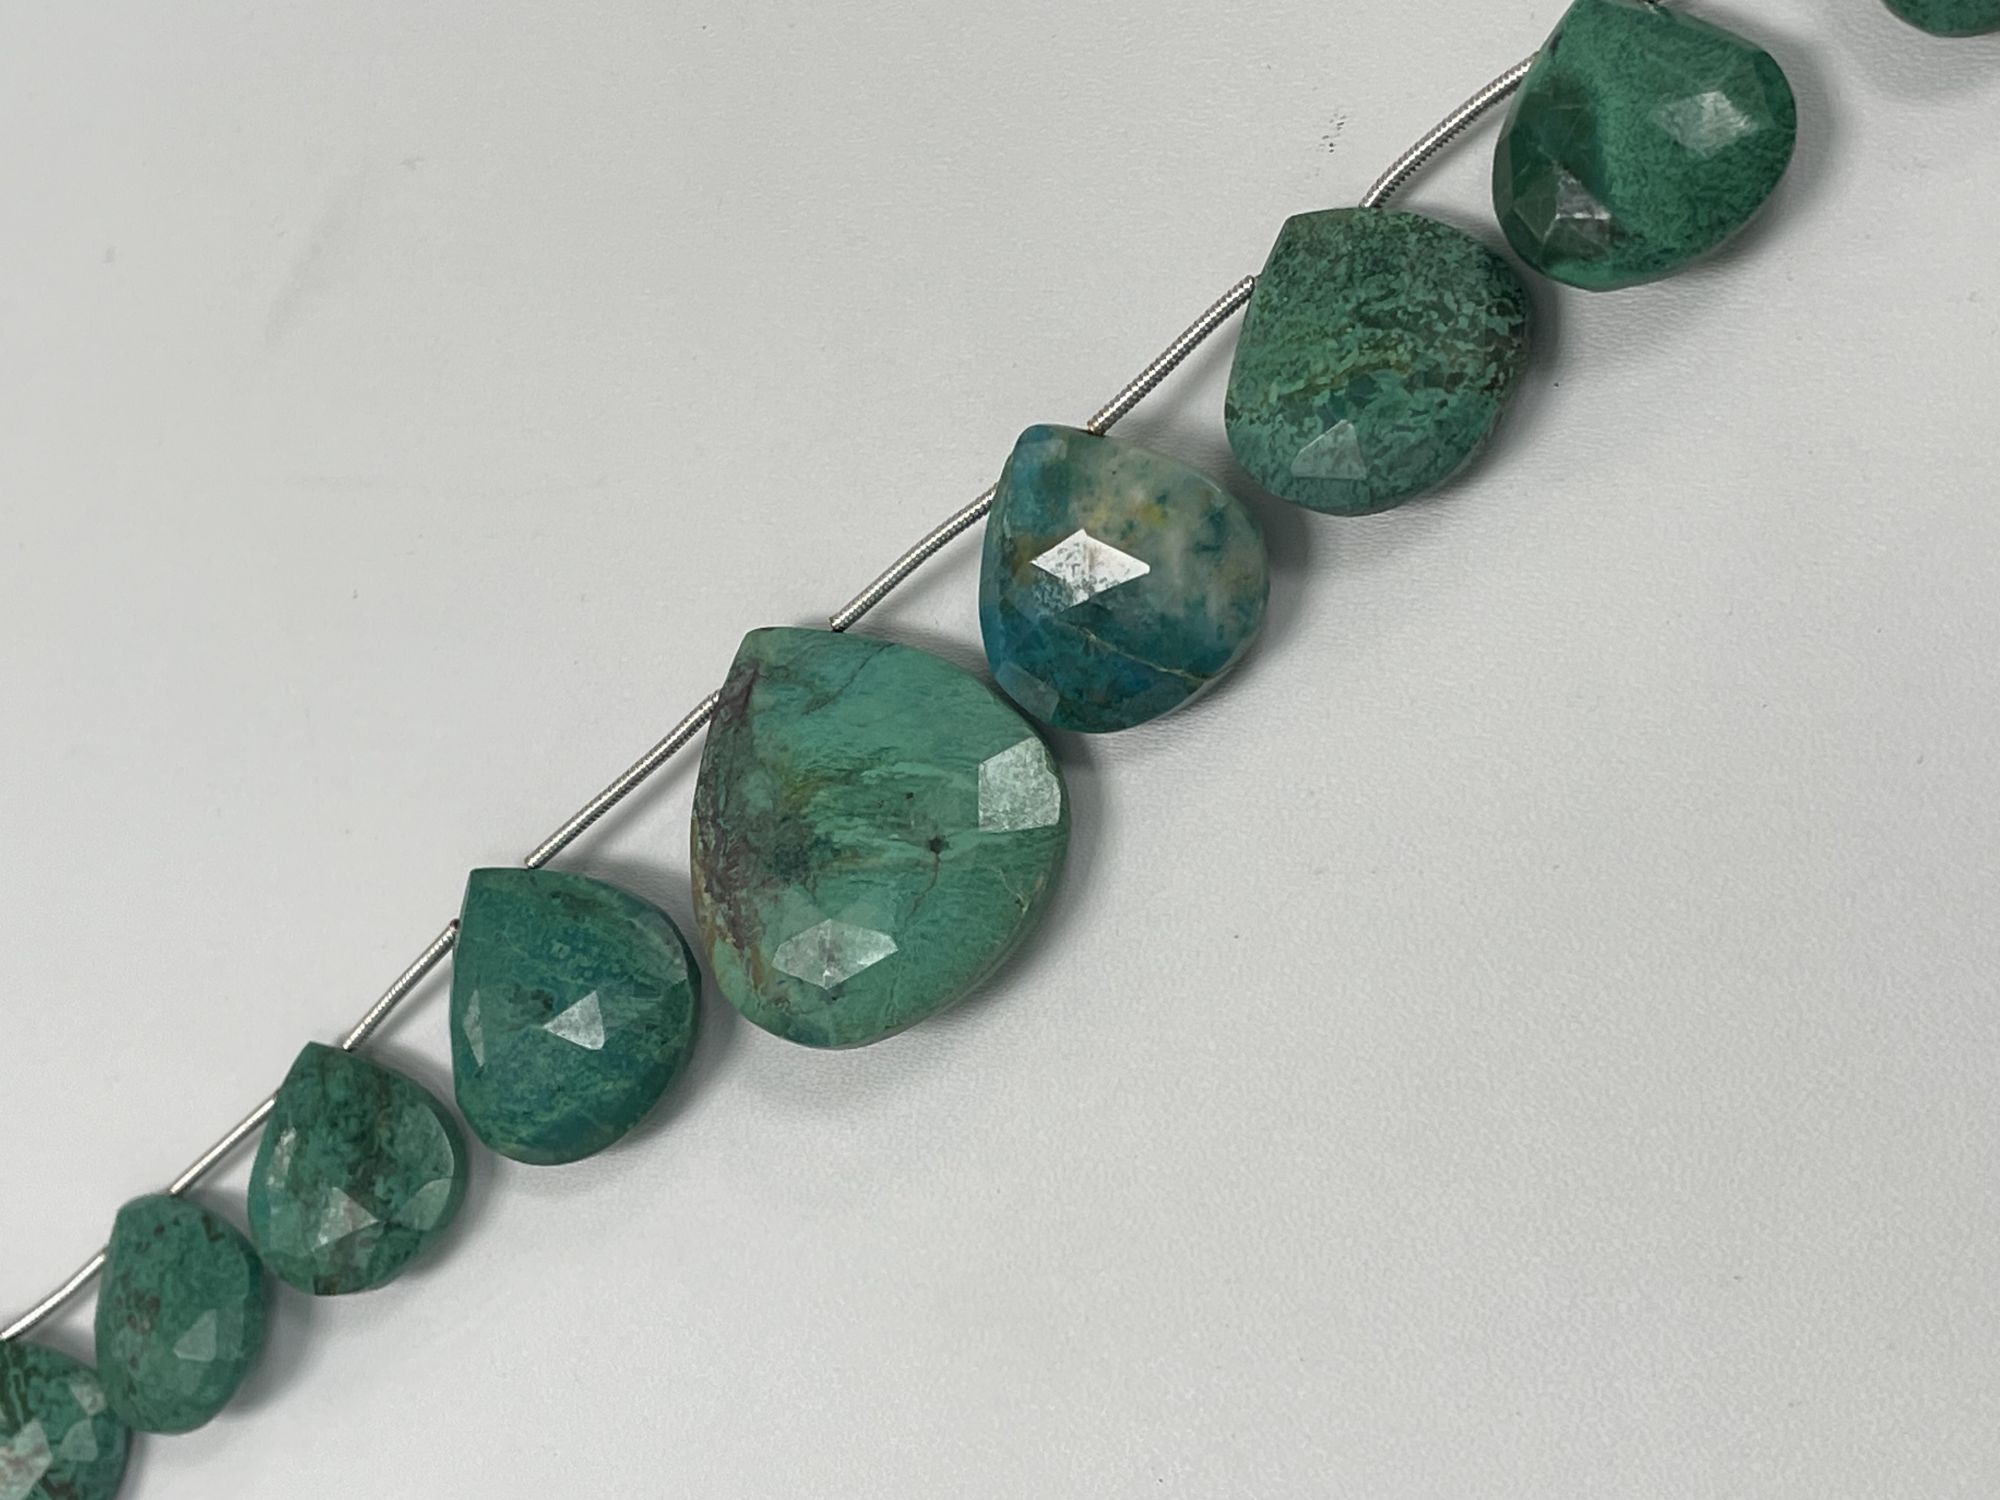 Chrysocolla Heart Faceted